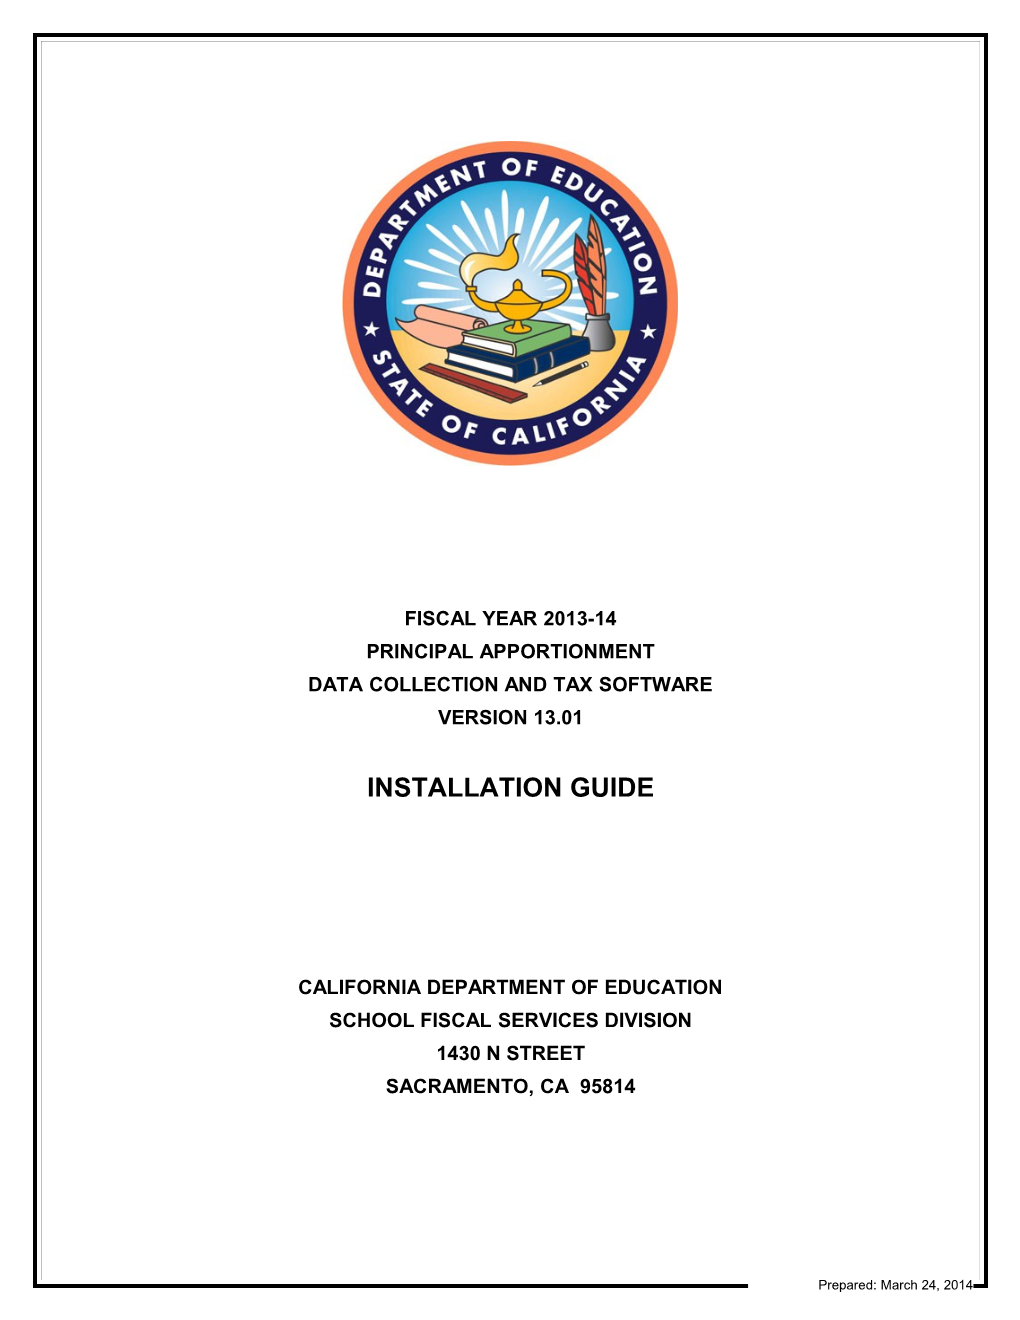 PA Software Install Guide, FY 2013-14 P2 - Principal Apportionment (CA Dept of Education)